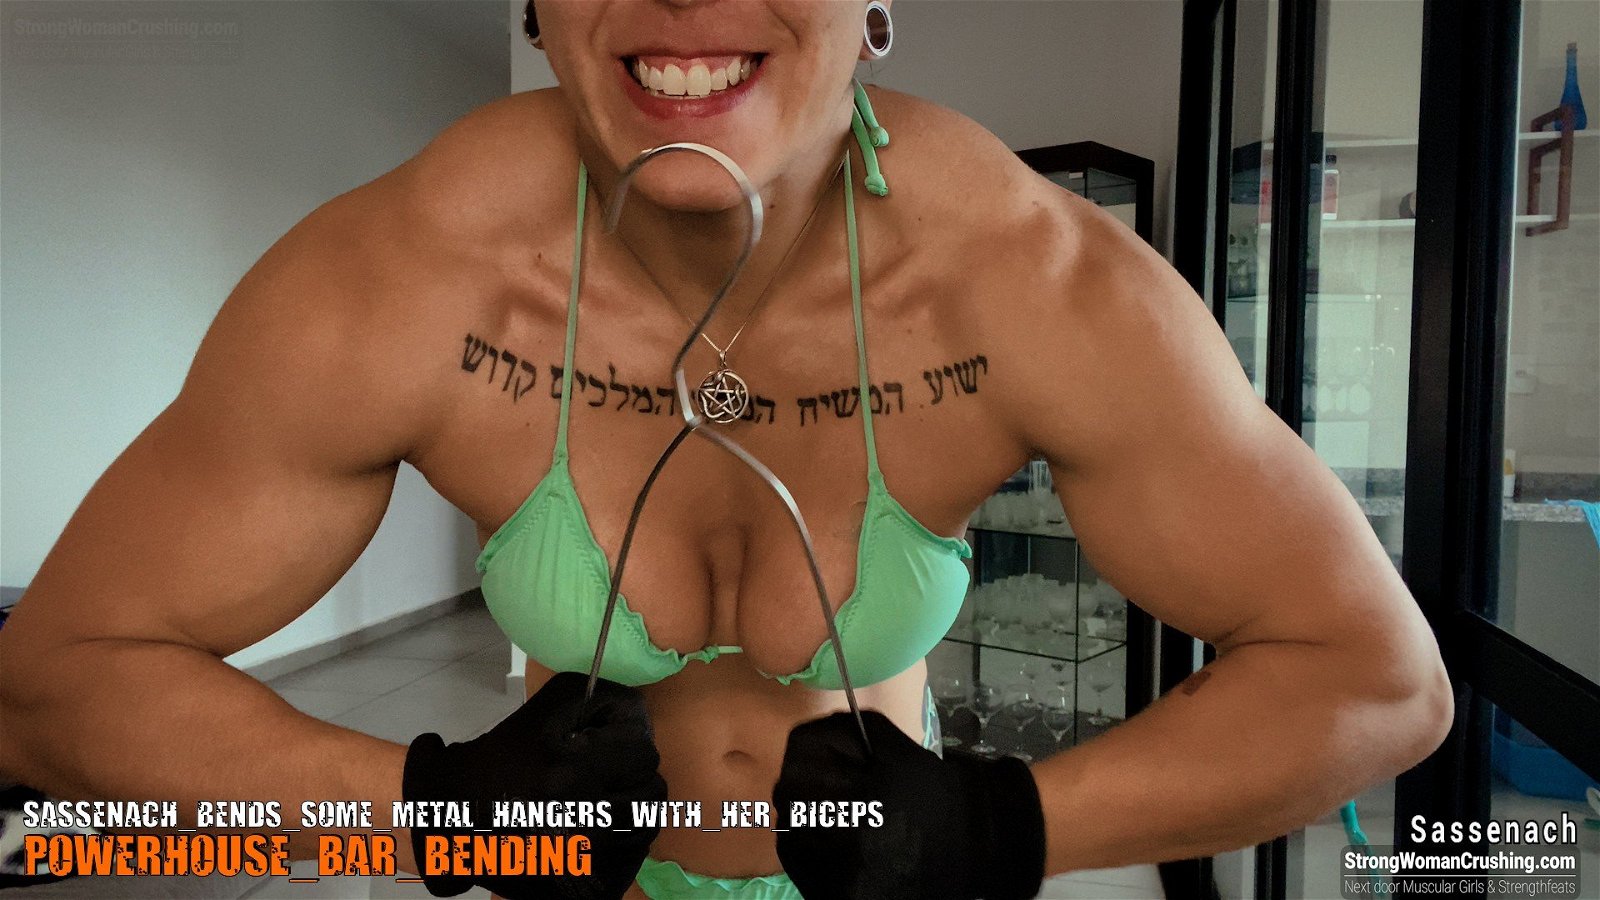 Photo by MusclegirlStrength with the username @MusclegirlStrength, who is a brand user,  September 1, 2023 at 5:20 PM and the text says '💪😍 Join the #StrongWomanCrushing movement and watch Sassenach bend metal hangers with her biceps! 💪😍 Get exclusive access to this video and other content by purchasing a membership at www.strongwomancrushing.com 💪😍 #GirlPower #FitnessGoals..'